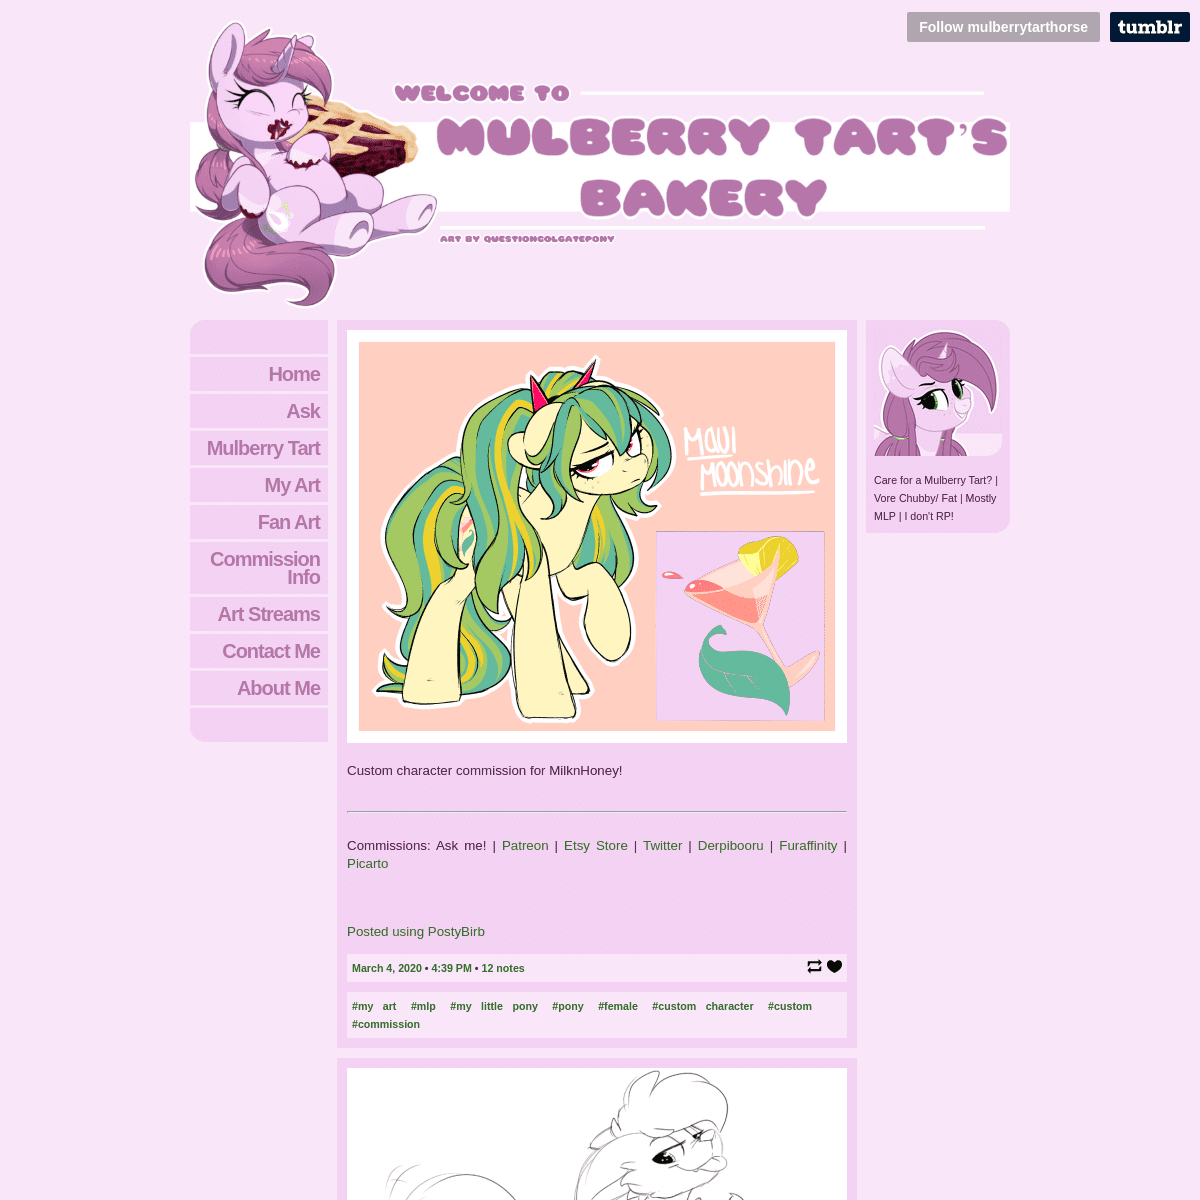 A complete backup of mulberrytarthorse.tumblr.com